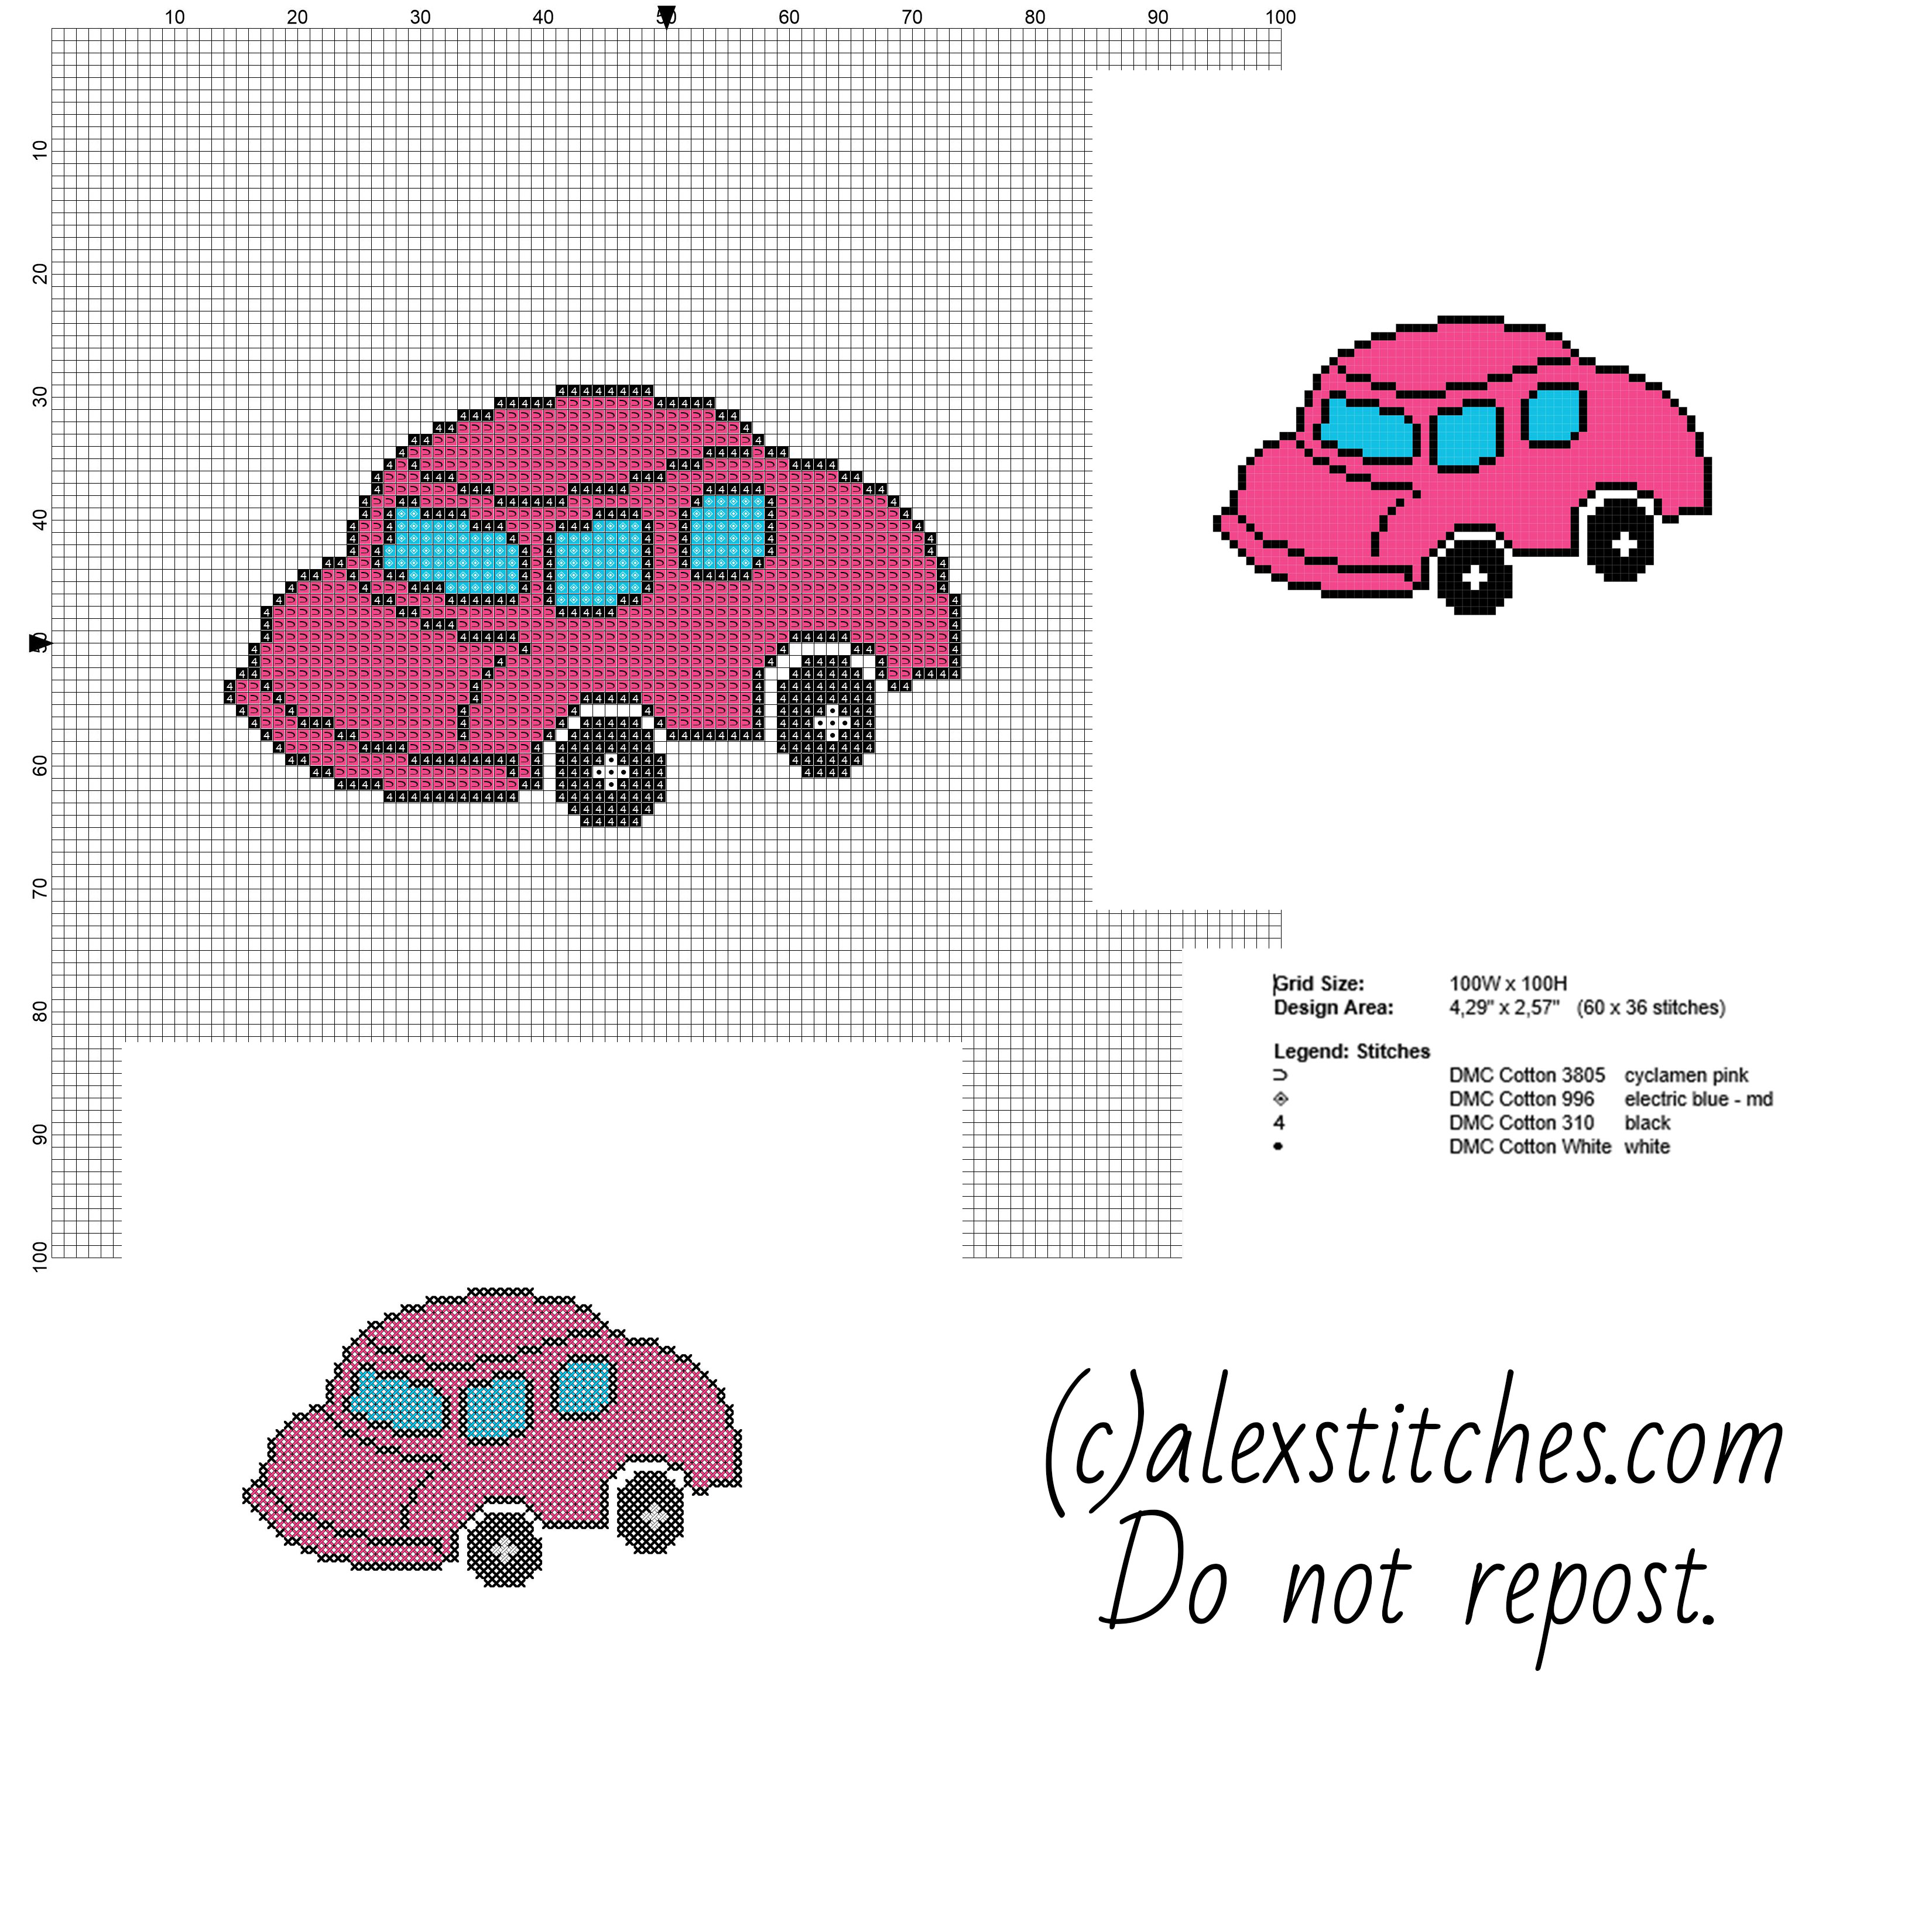 Little baby toy pink car free cross stitch pattern download in children category